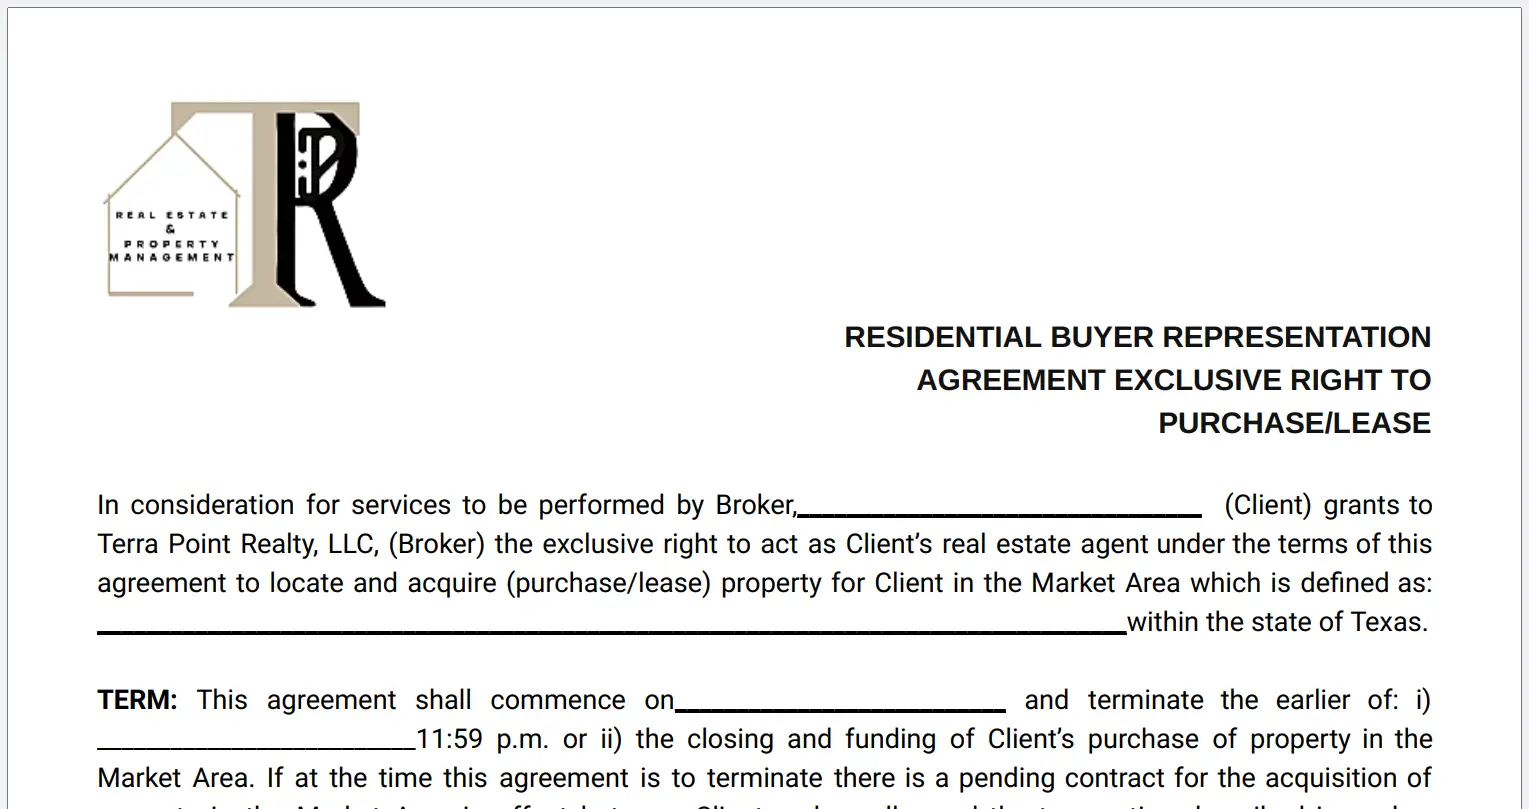 Signing a buyer representation agreement with Terra Point Realty.